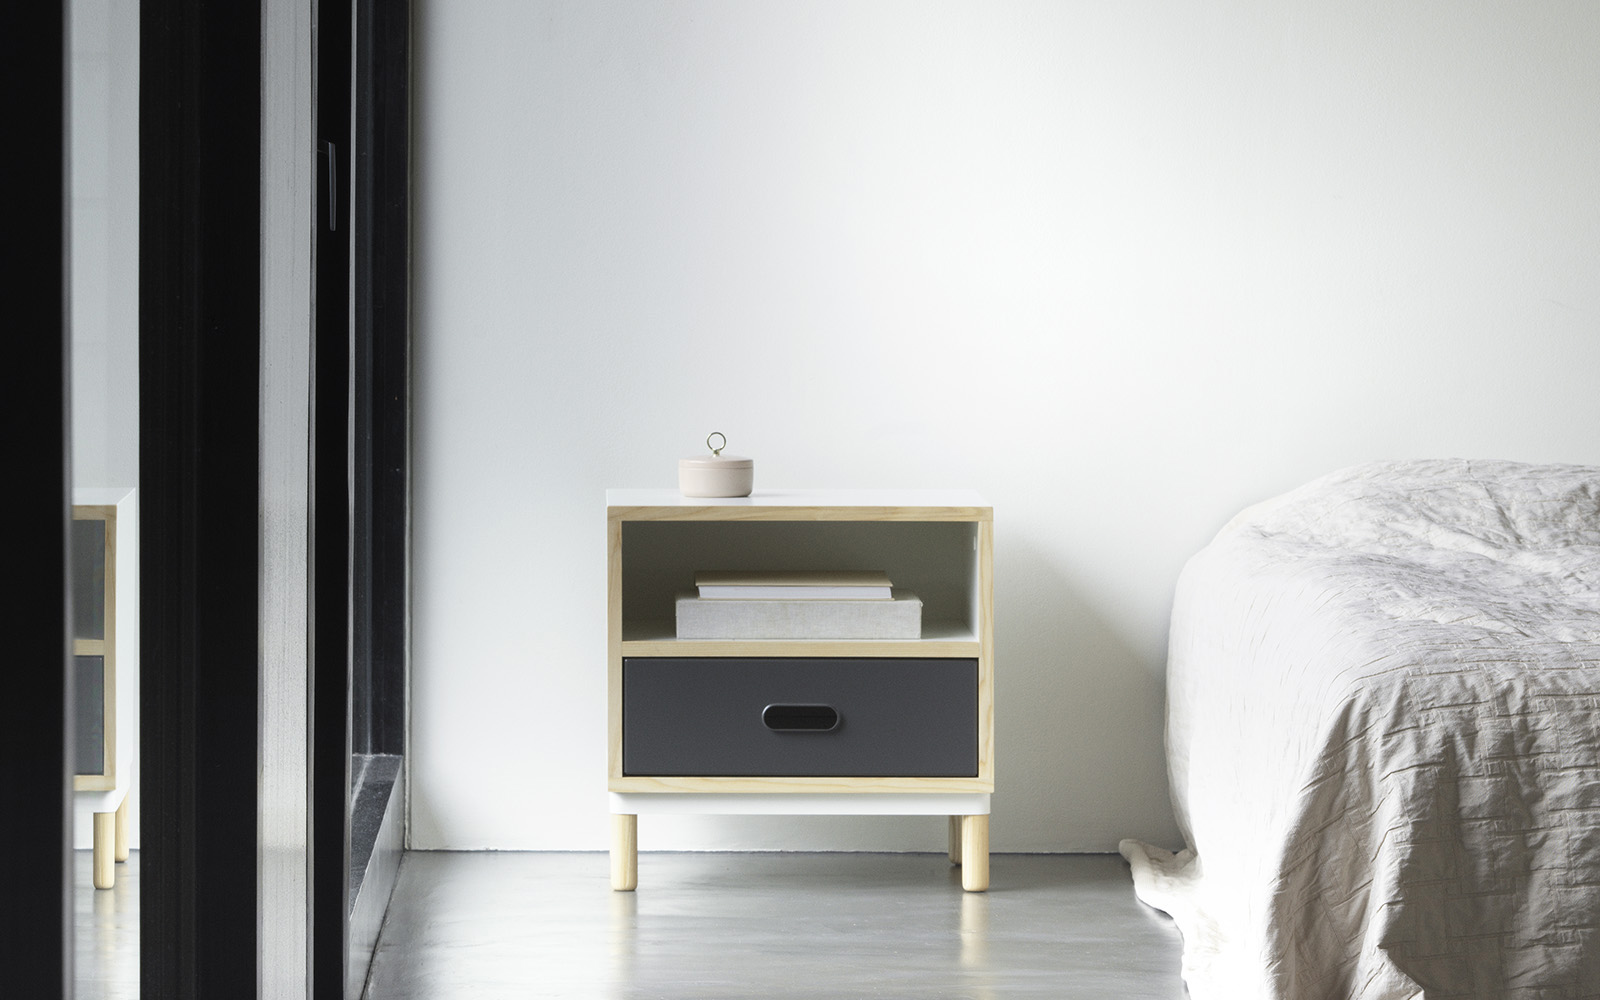 1 Drawer Fuss-free Assembly Contemporary Design Simba Oak Bedside Table 58 x 43 x 40 cm